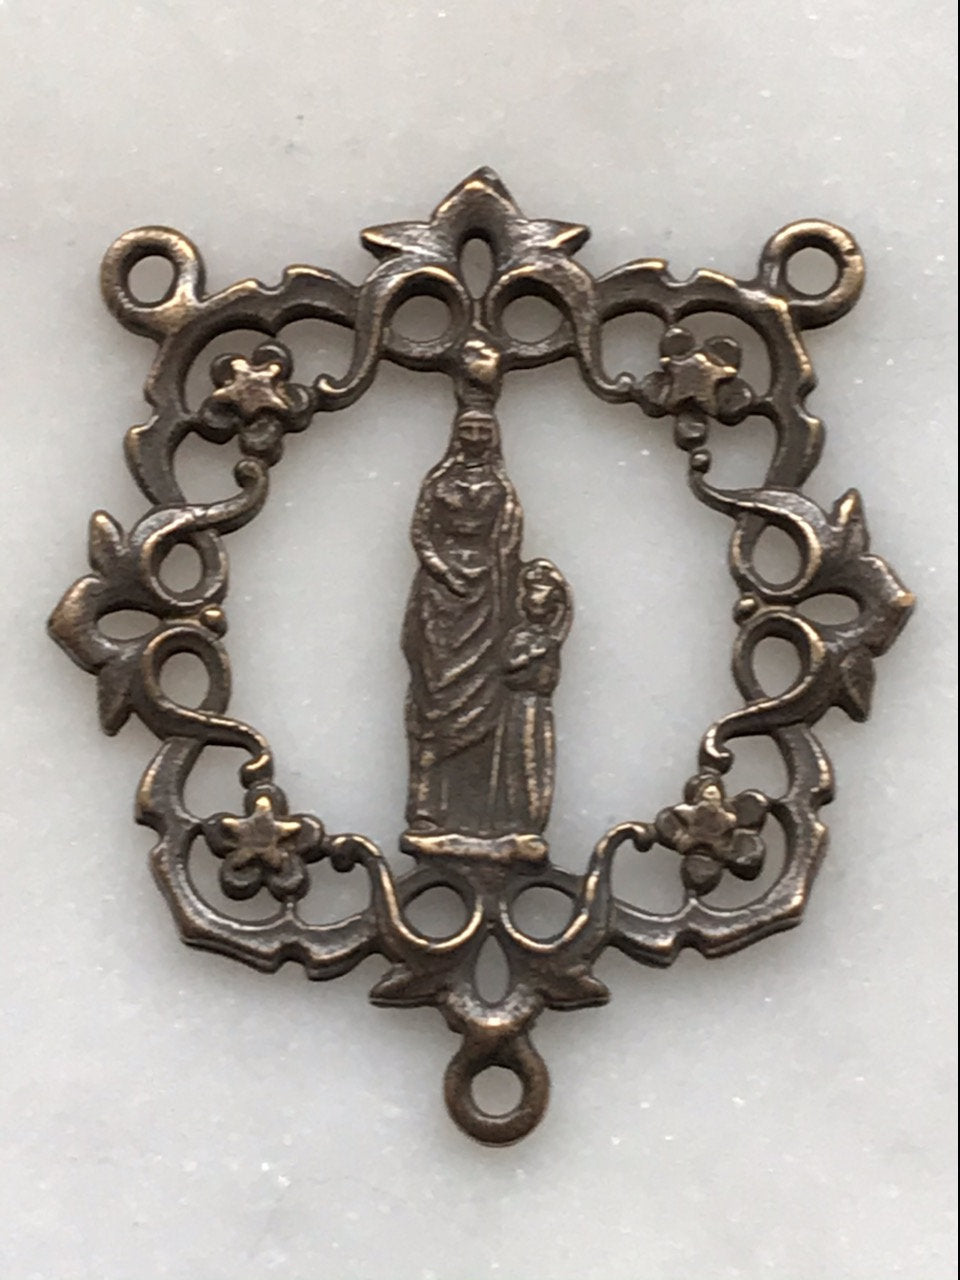 Rosary Center - Mary and the Child Jesus - Bronze or Sterling Silver - Antique Reproduction 029